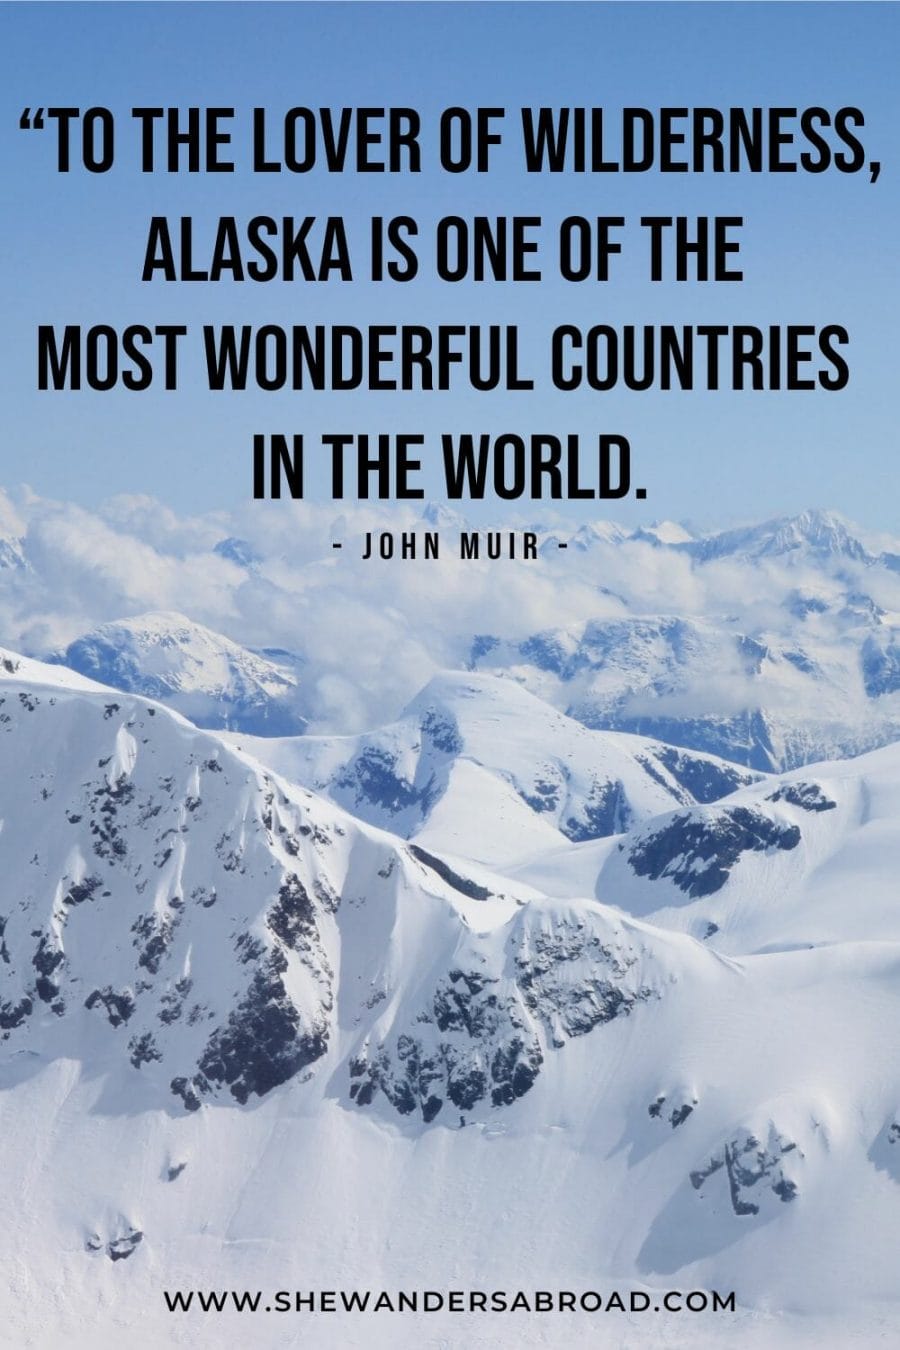 Best Quotes About Alaska for Instagram